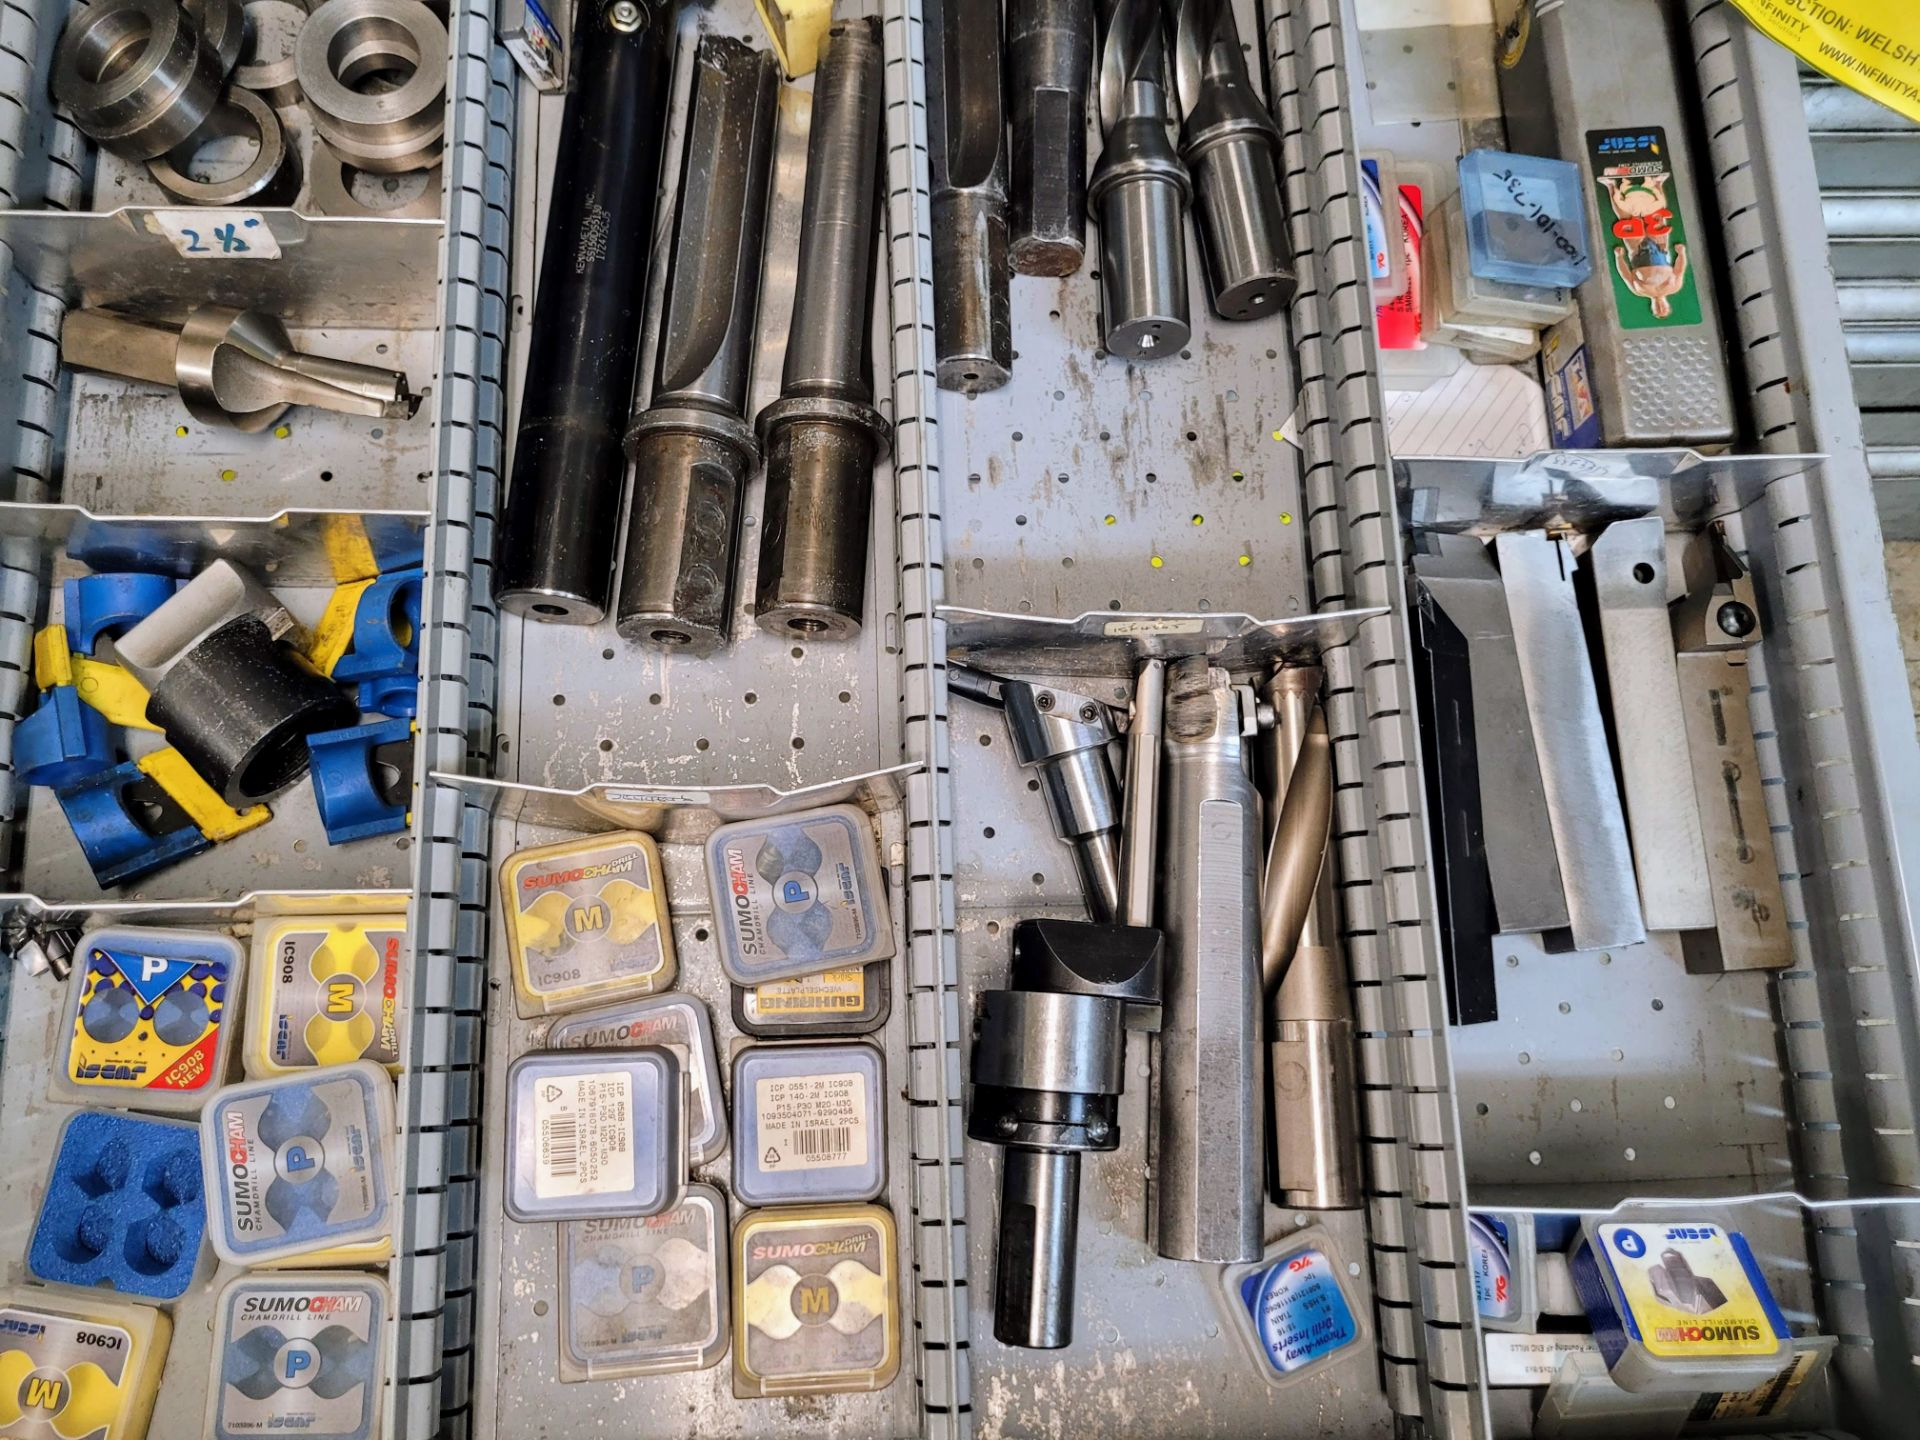 CONTENTS OF (1) TOOL CABINET DRAWER INCLUDING CARBIDE INSERTS AND CUTTING BARS, ETC. (NO DRAWERS)